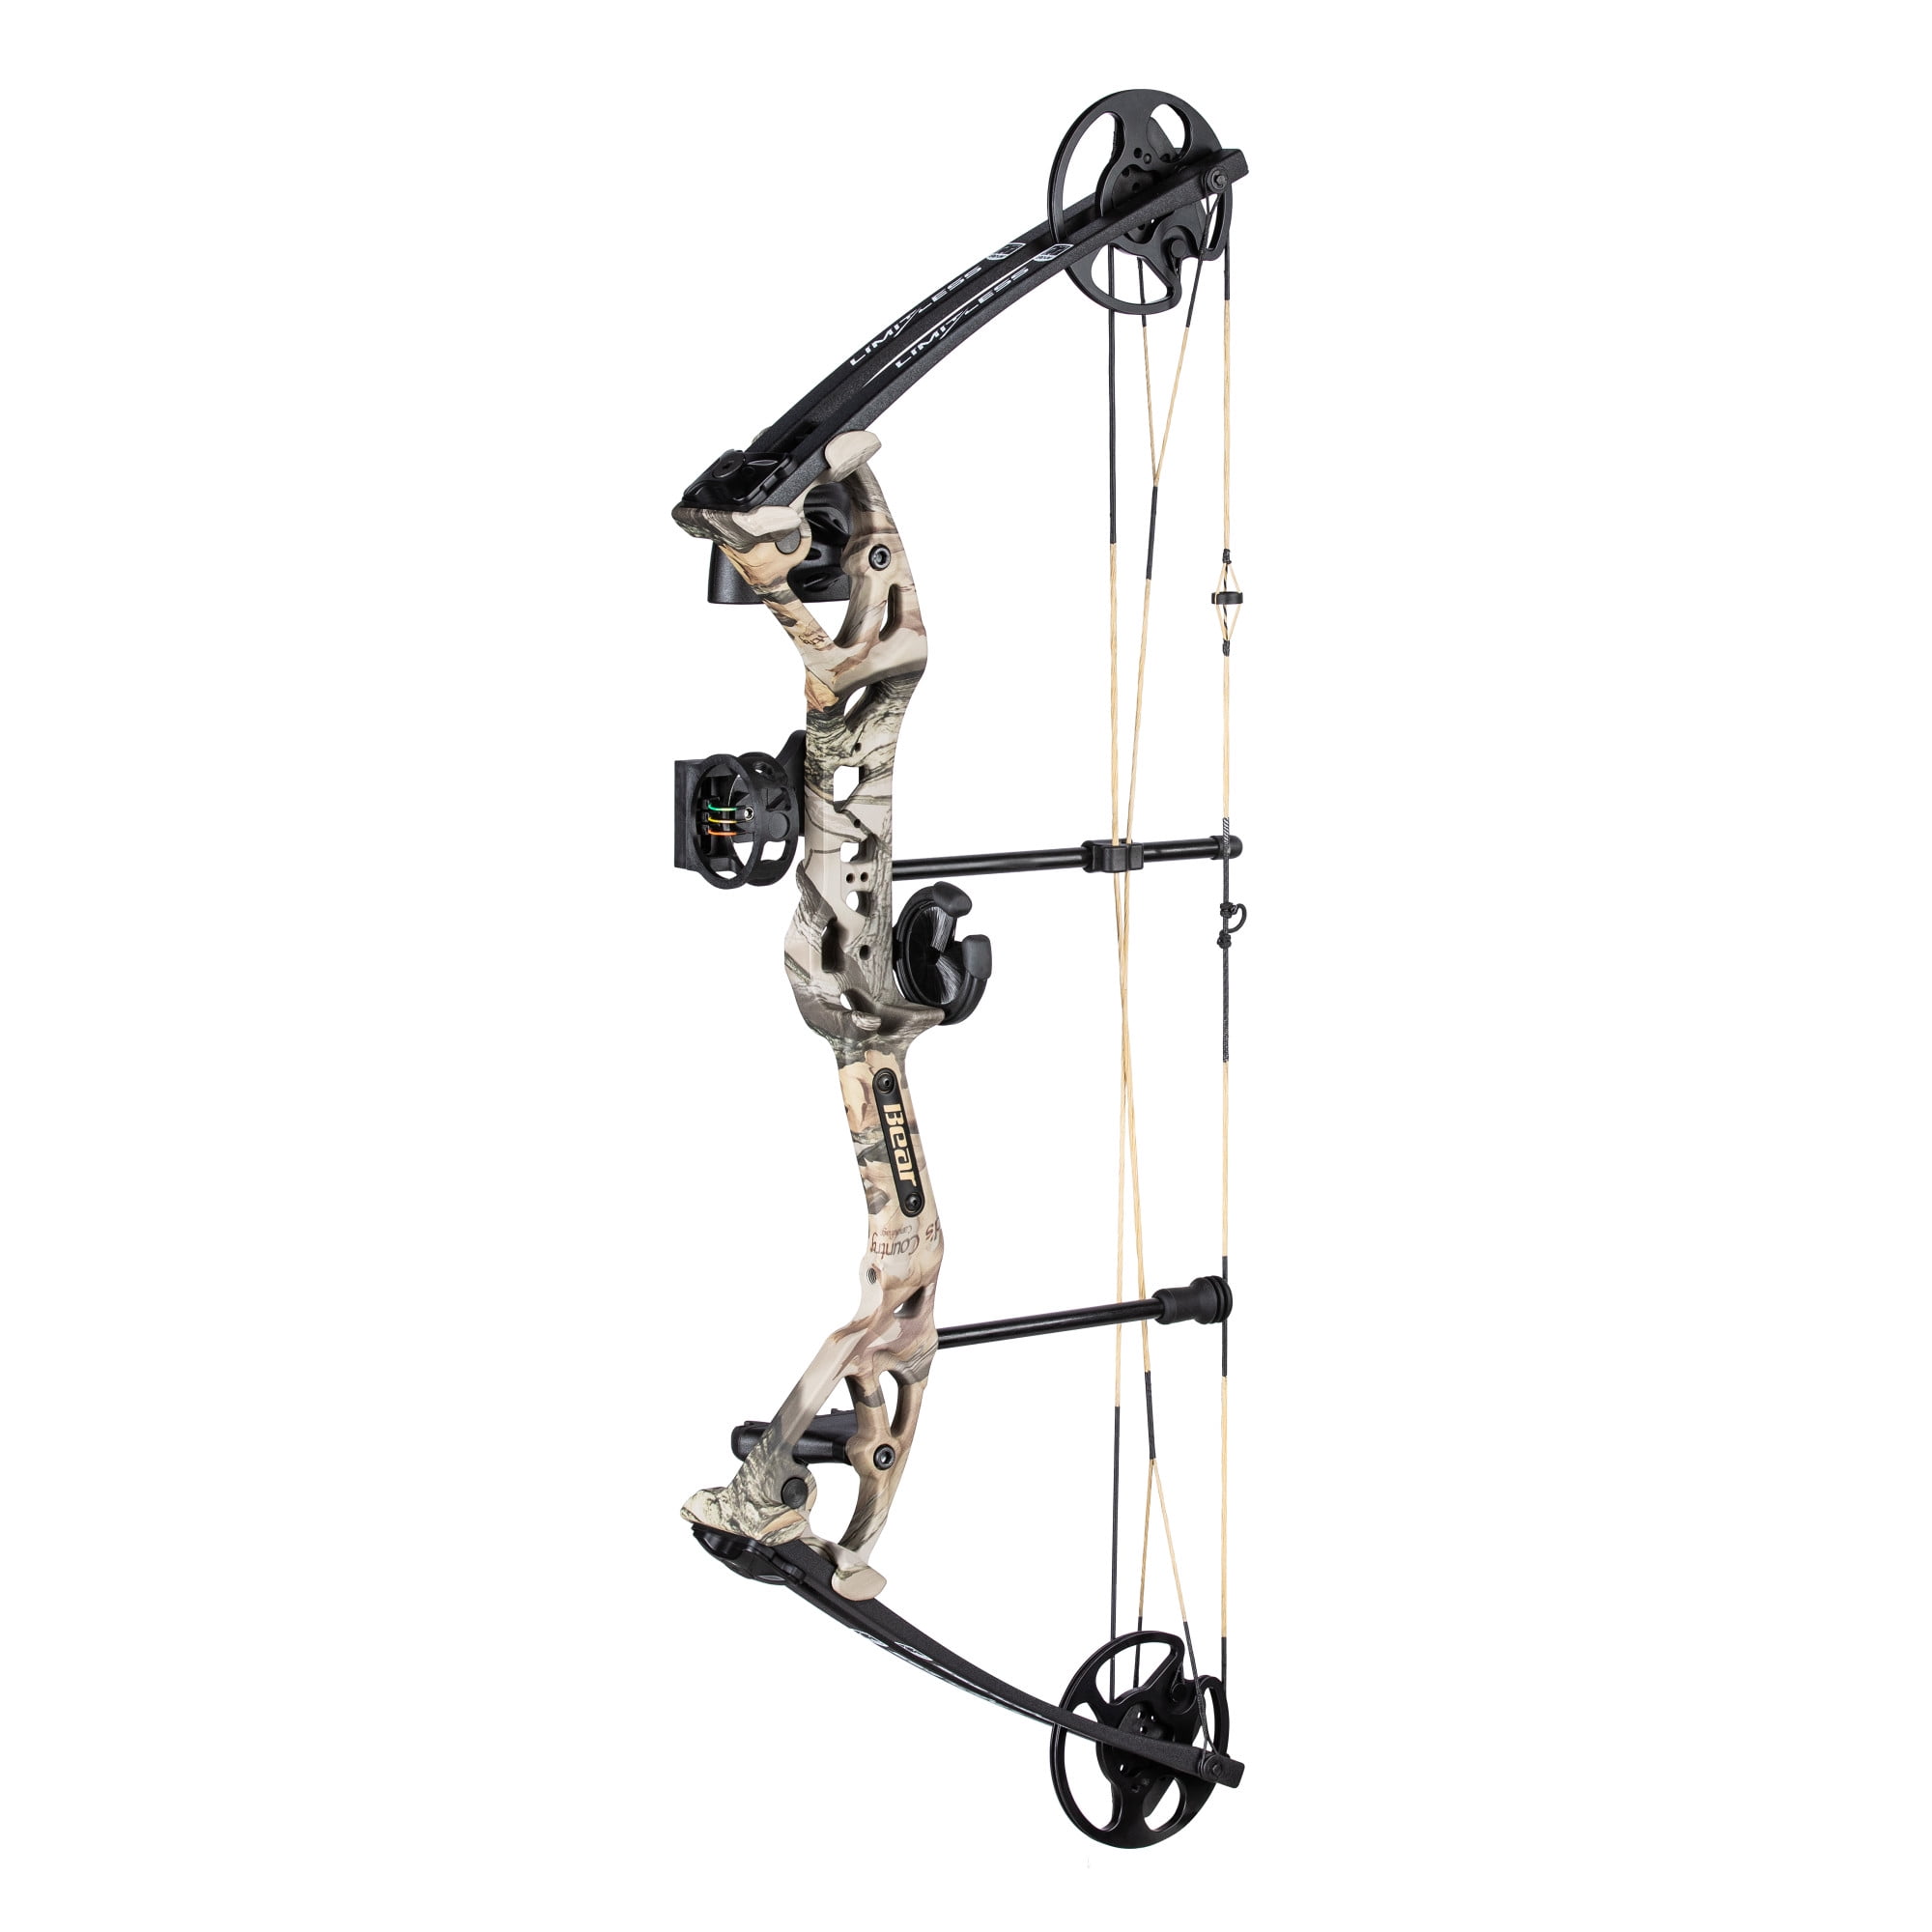 Black Genesis Archery Universal Original Compound Practice Bow Right Handed 